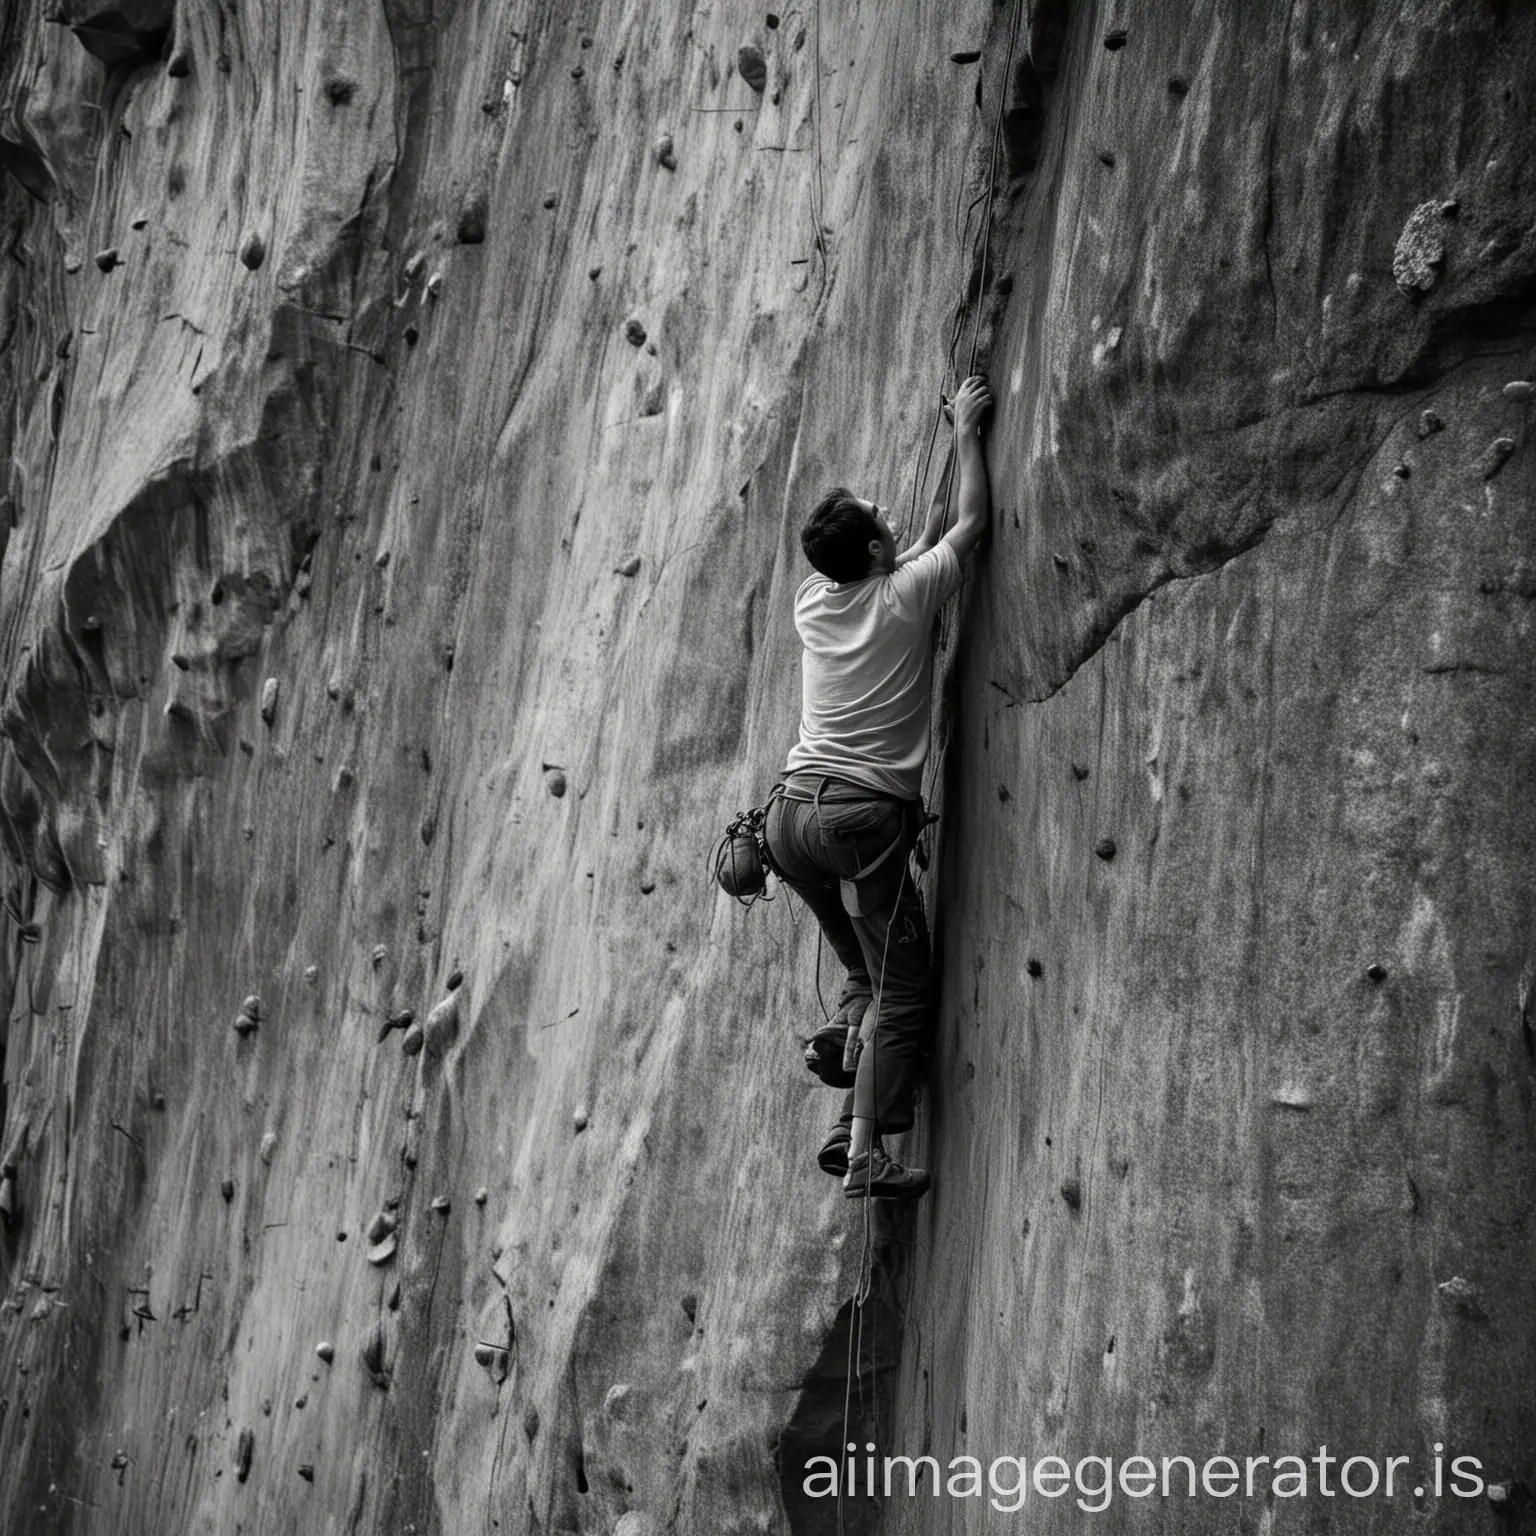 Poster of dreaming in black and white, a person climbing hard